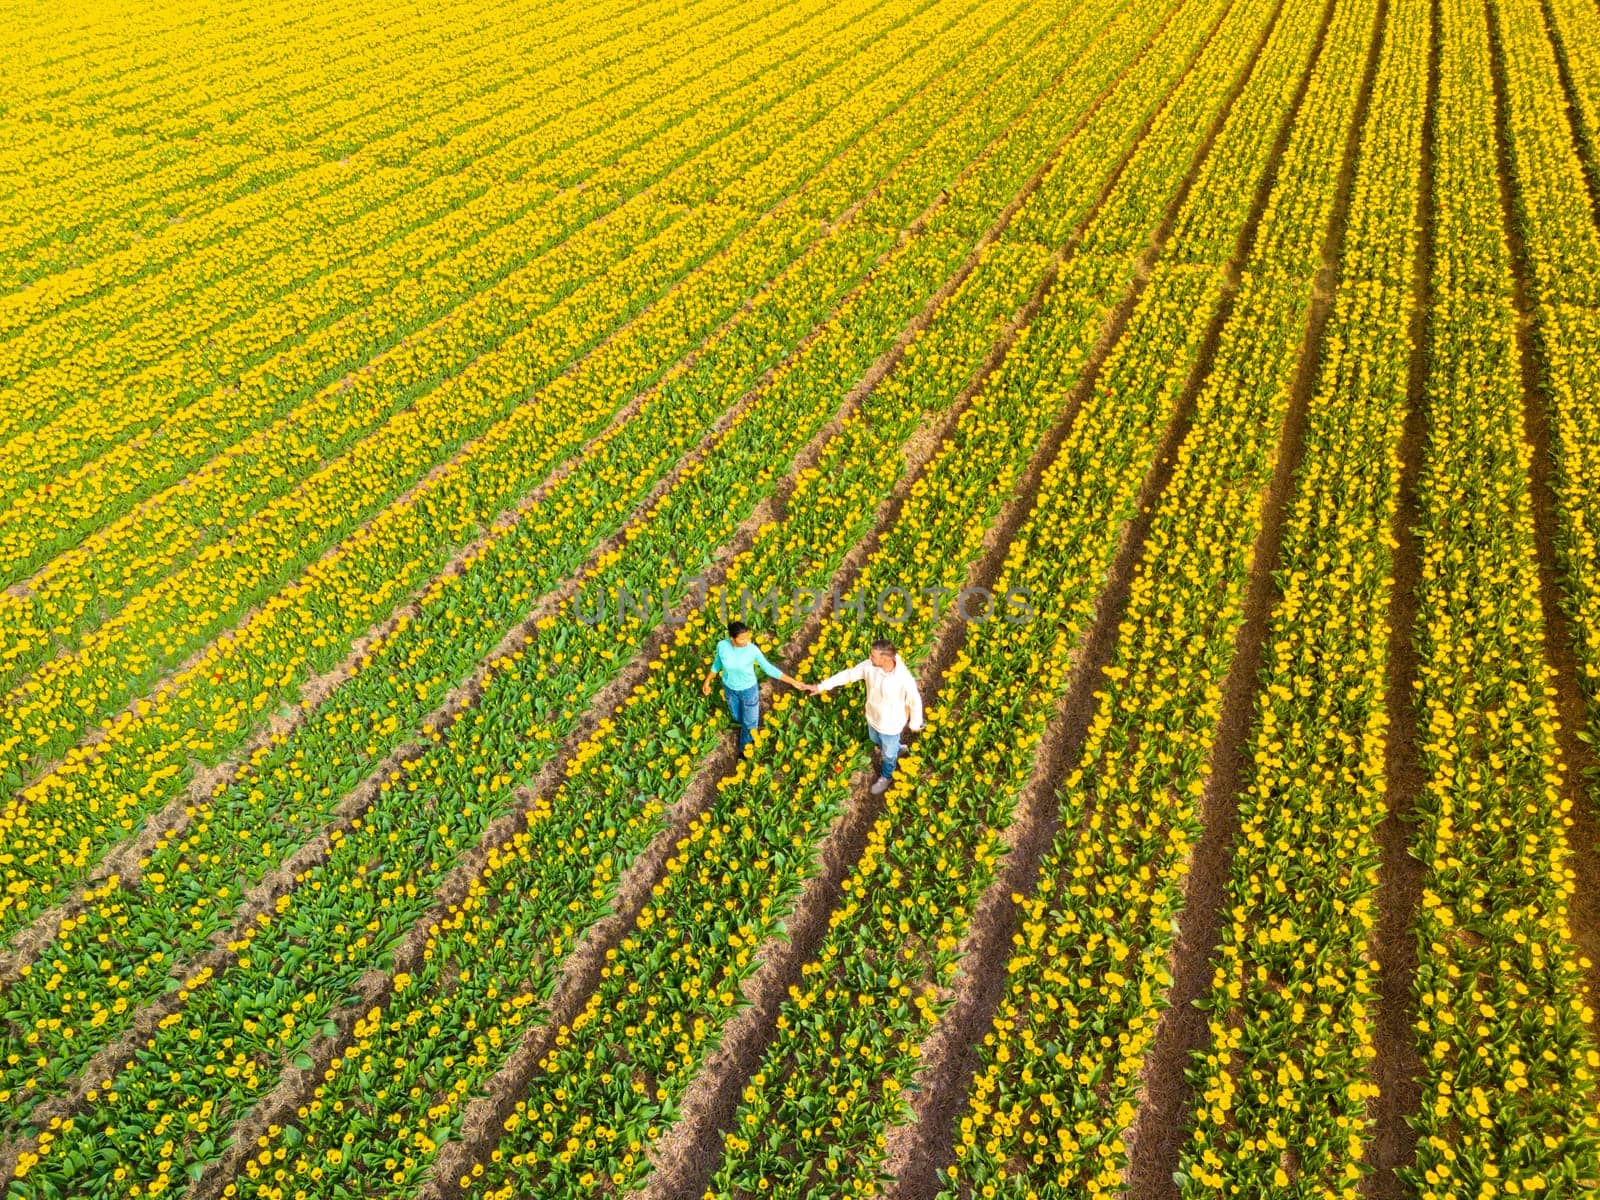 Men and women in flower fields seen from above with a drone in the Netherlands, Tulip fields in the Netherlands during Spring, diverse couple in spring flower field, Asian women and European man